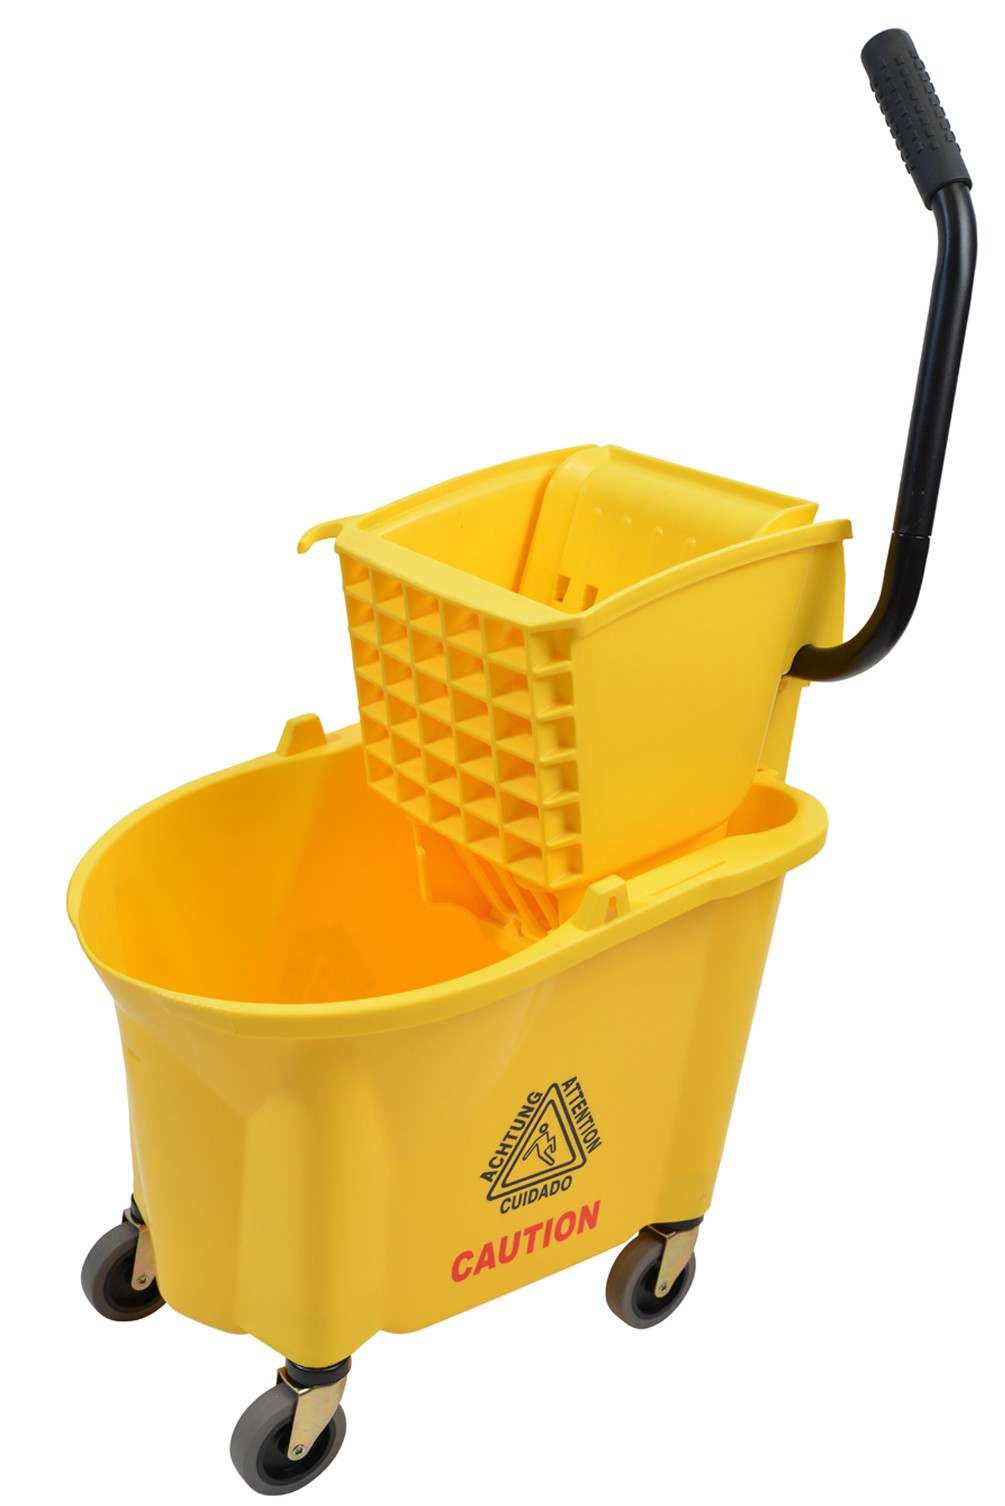 1026YW 26 Qt Yellow Mop Bucket With Side Press Wringer